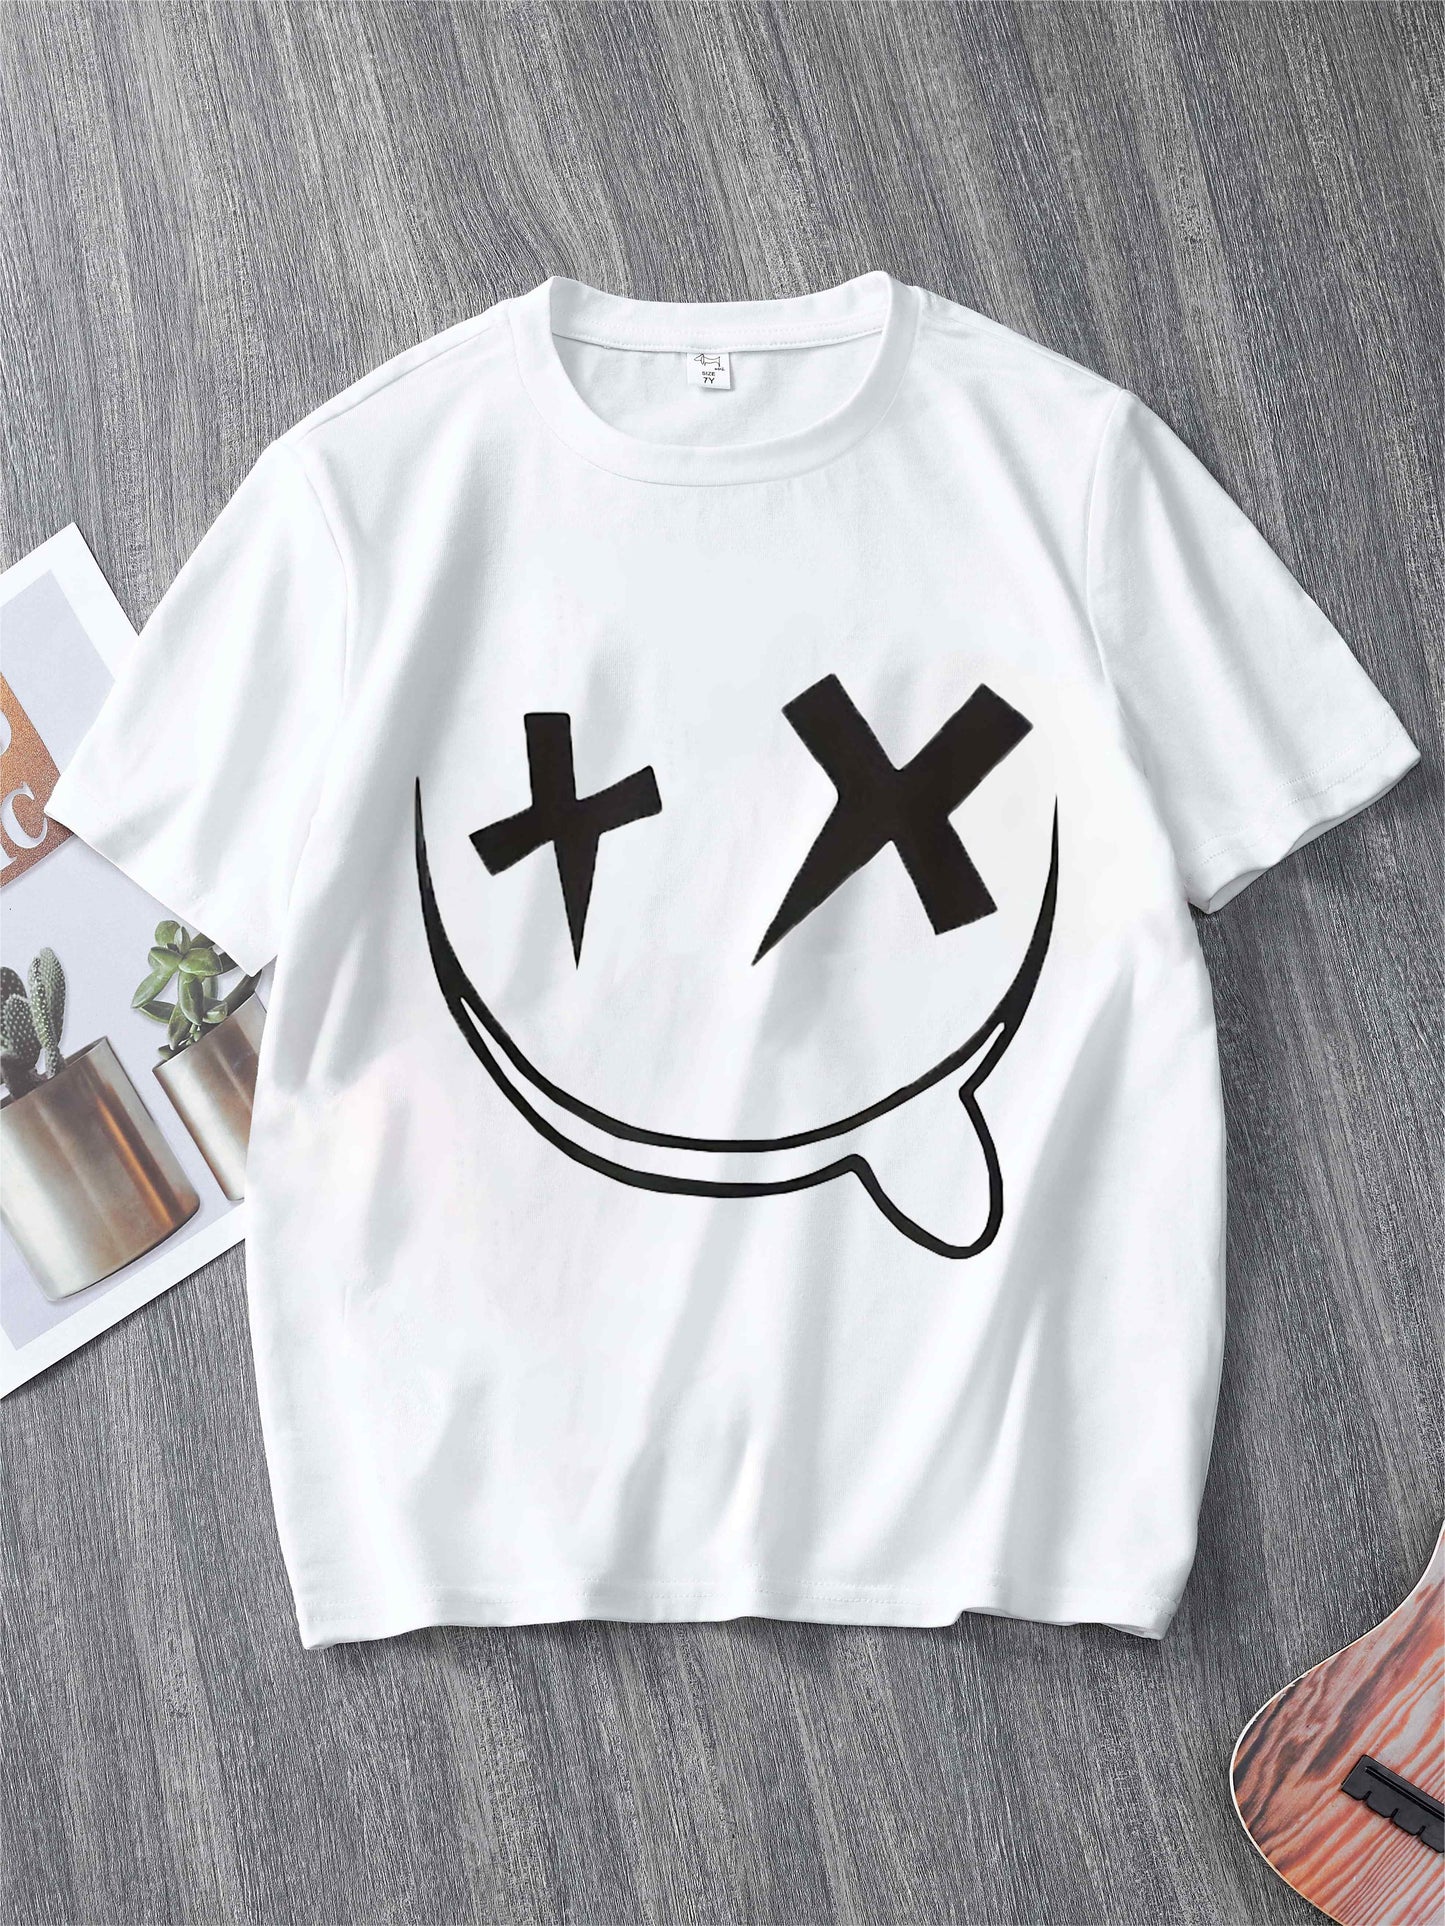 Boys Funny Face Cotton T-shirt Tee Top Short Sleeves Crew Neck Summer Casual Kids Clothes